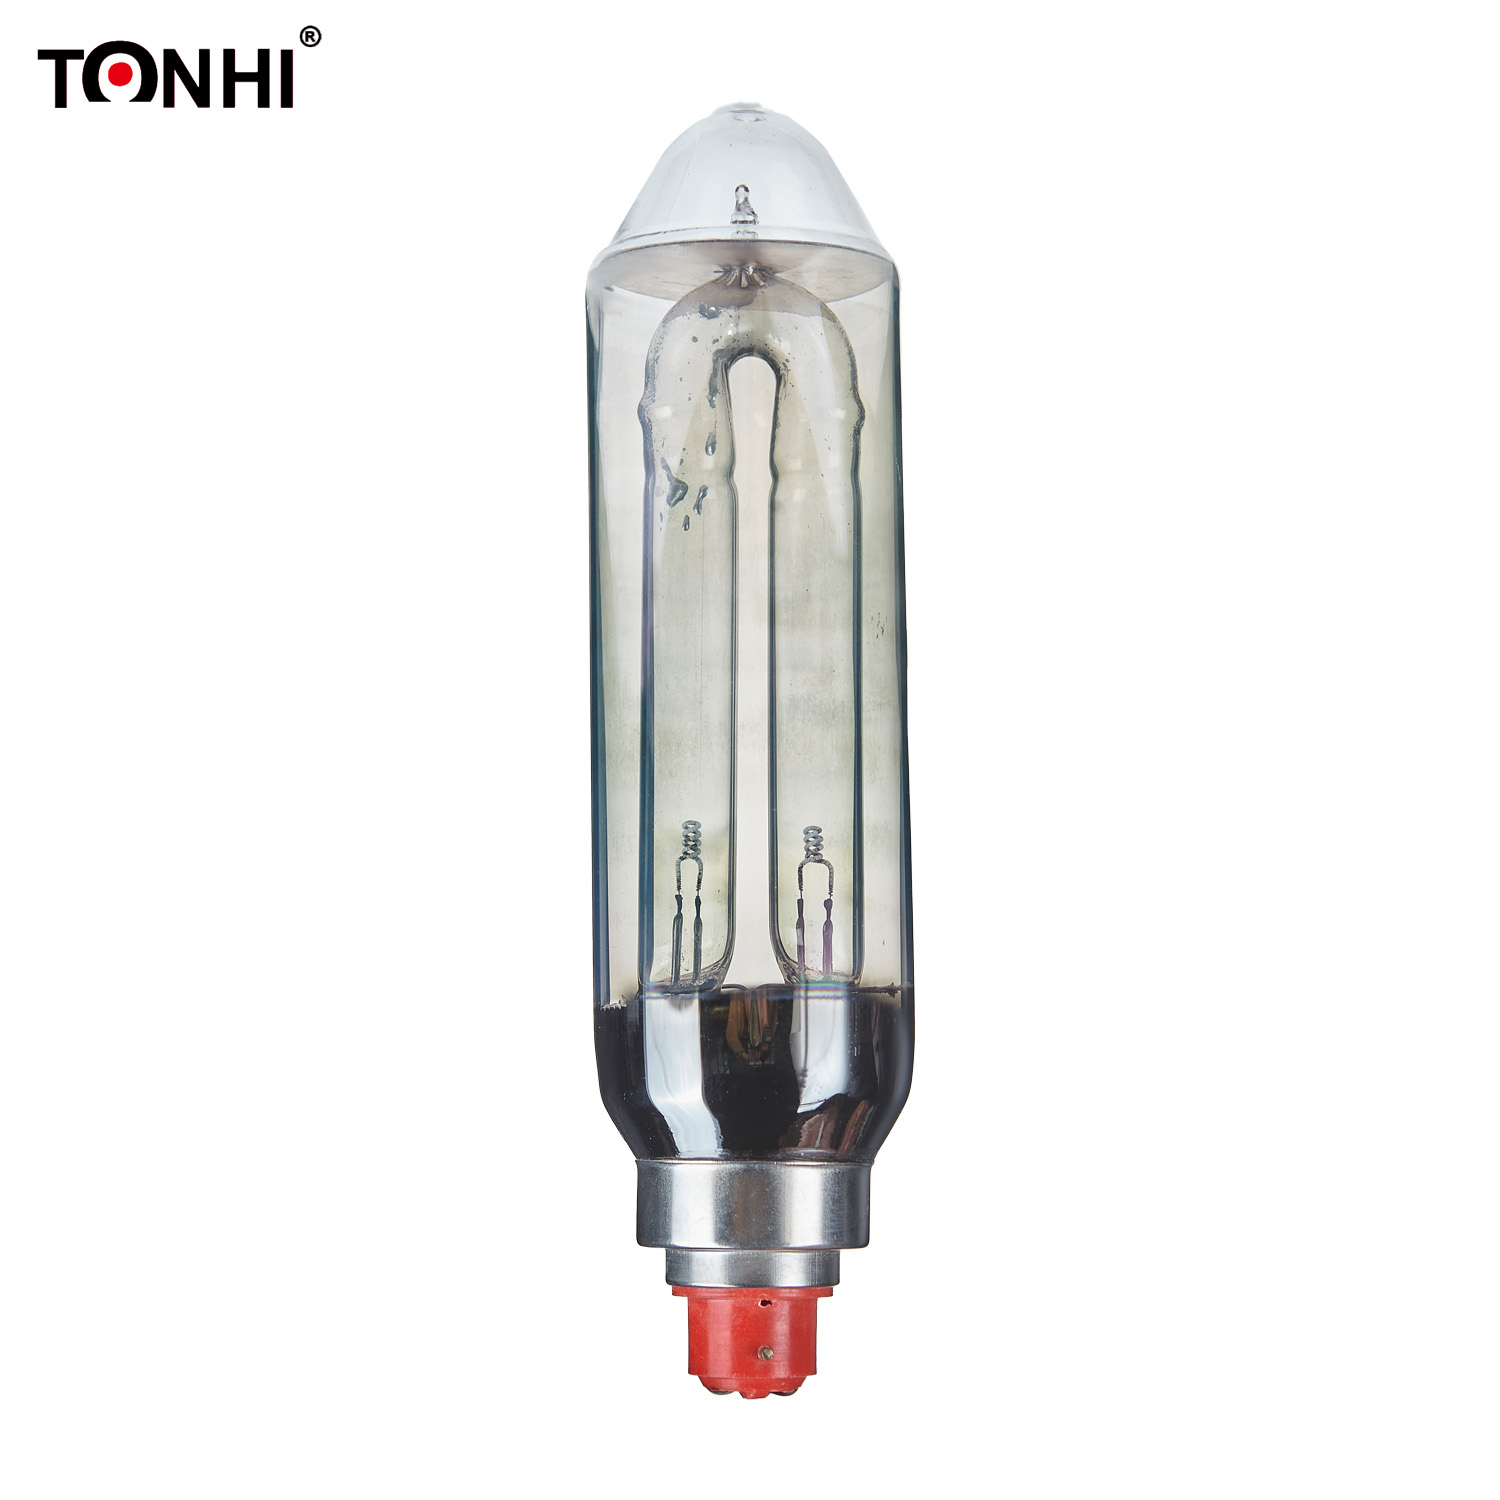 SOX 35W BY22d low pressure sodium Lamp